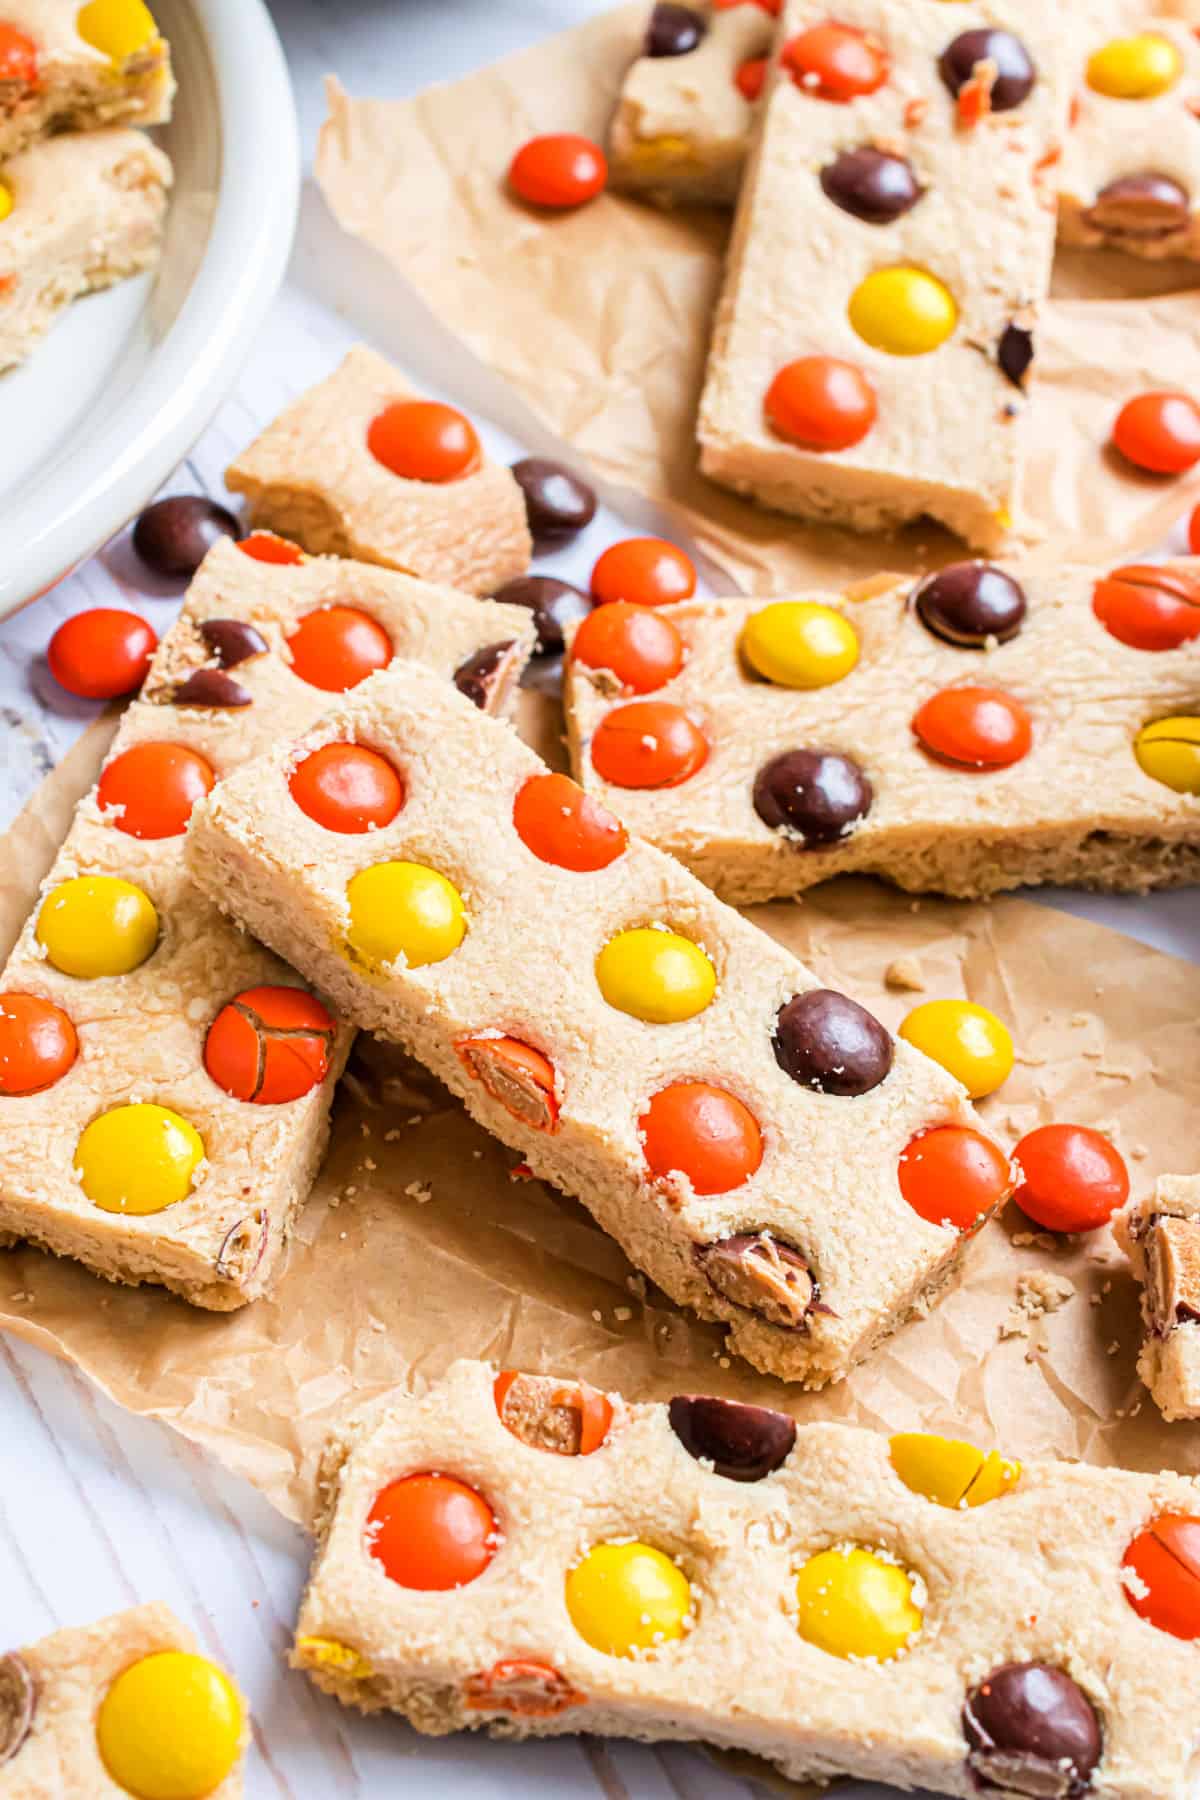 Peanut butter shortbread with reese's pieces and cut into bars.